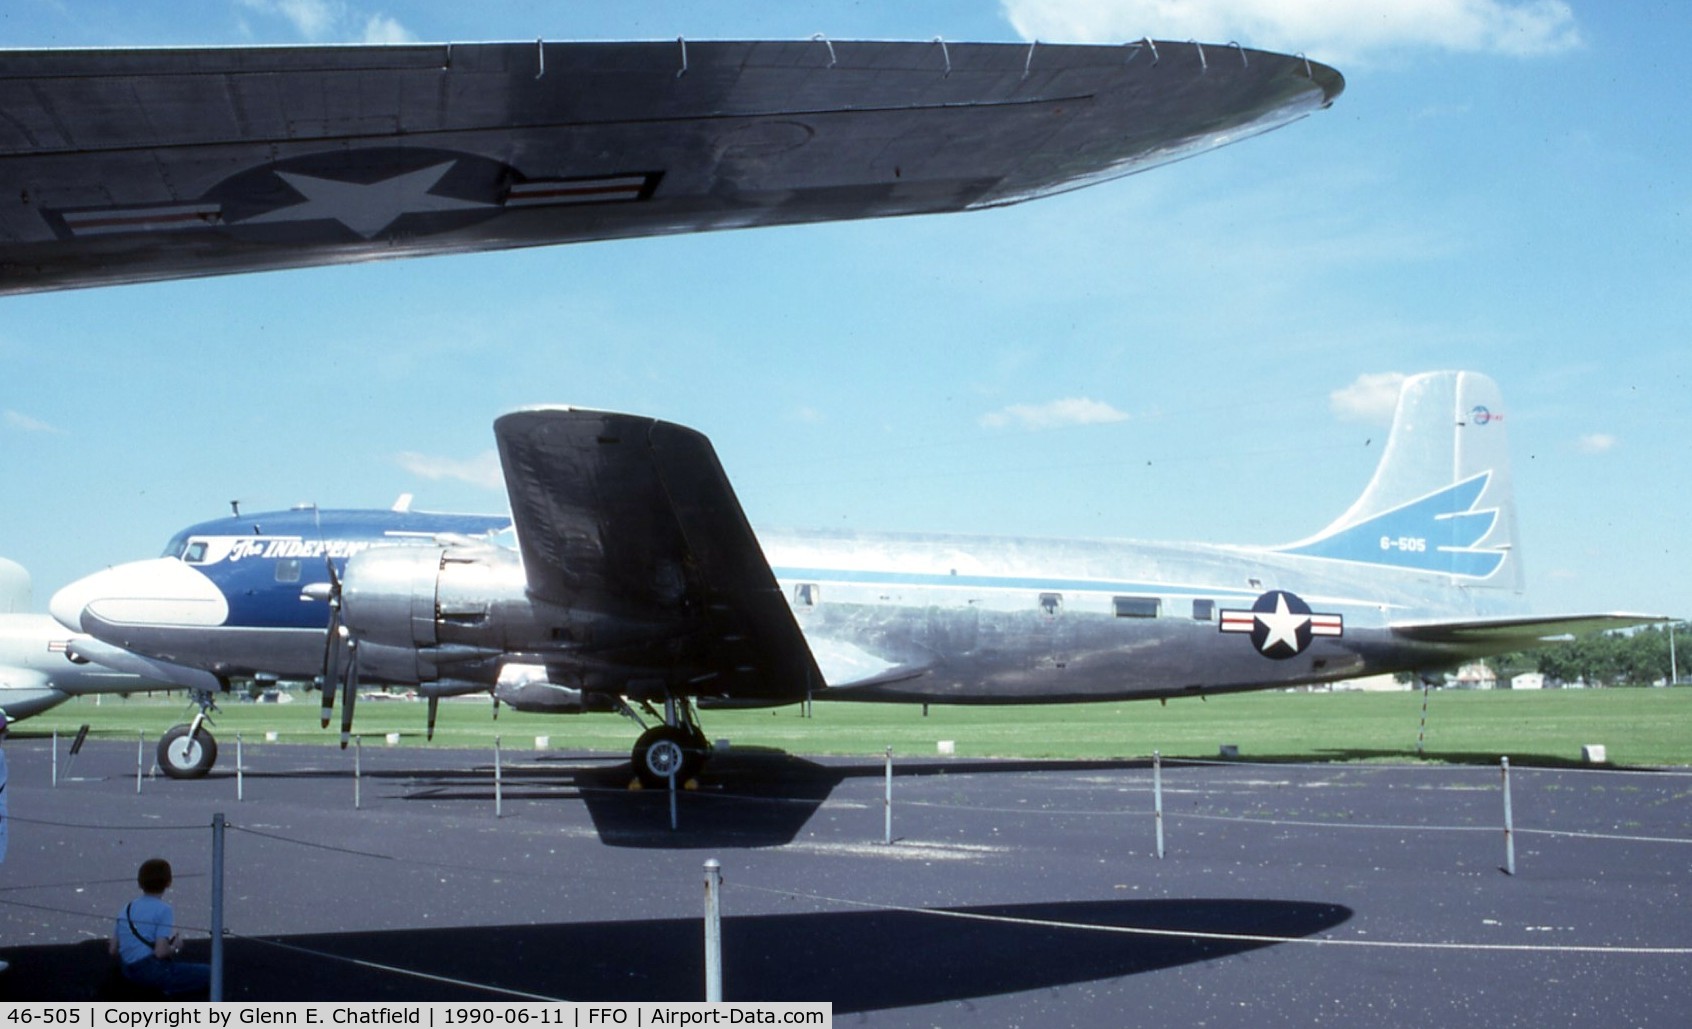 46-505, 1947 Douglas VC-118A Liftmaster C/N 42881, President Truman's VC-118A at the National Museum of the U.S. Air Force